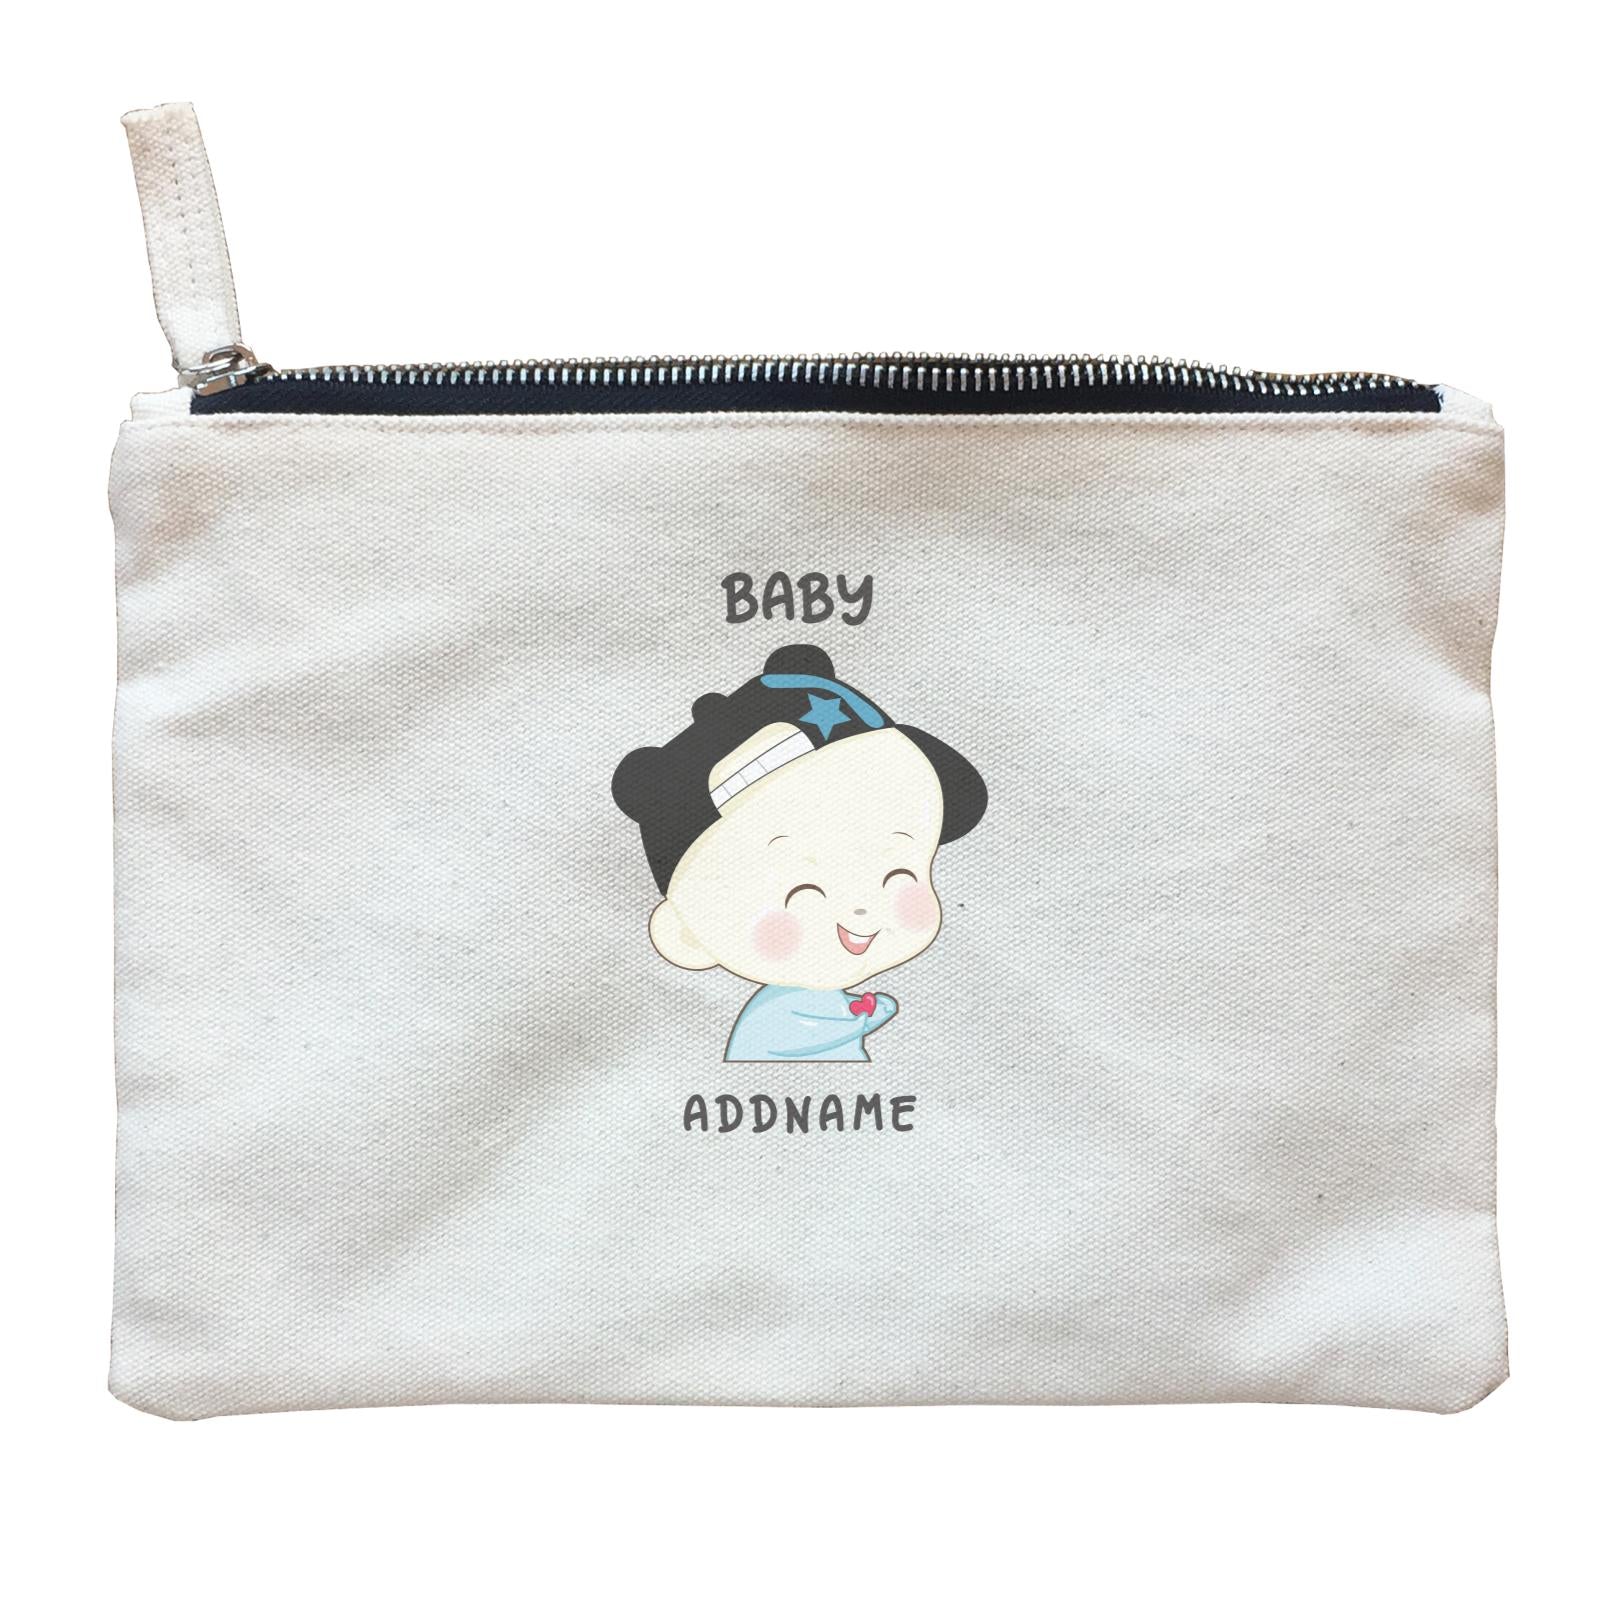 My Lovely Family Series Baby Boy Addname Zipper Pouch